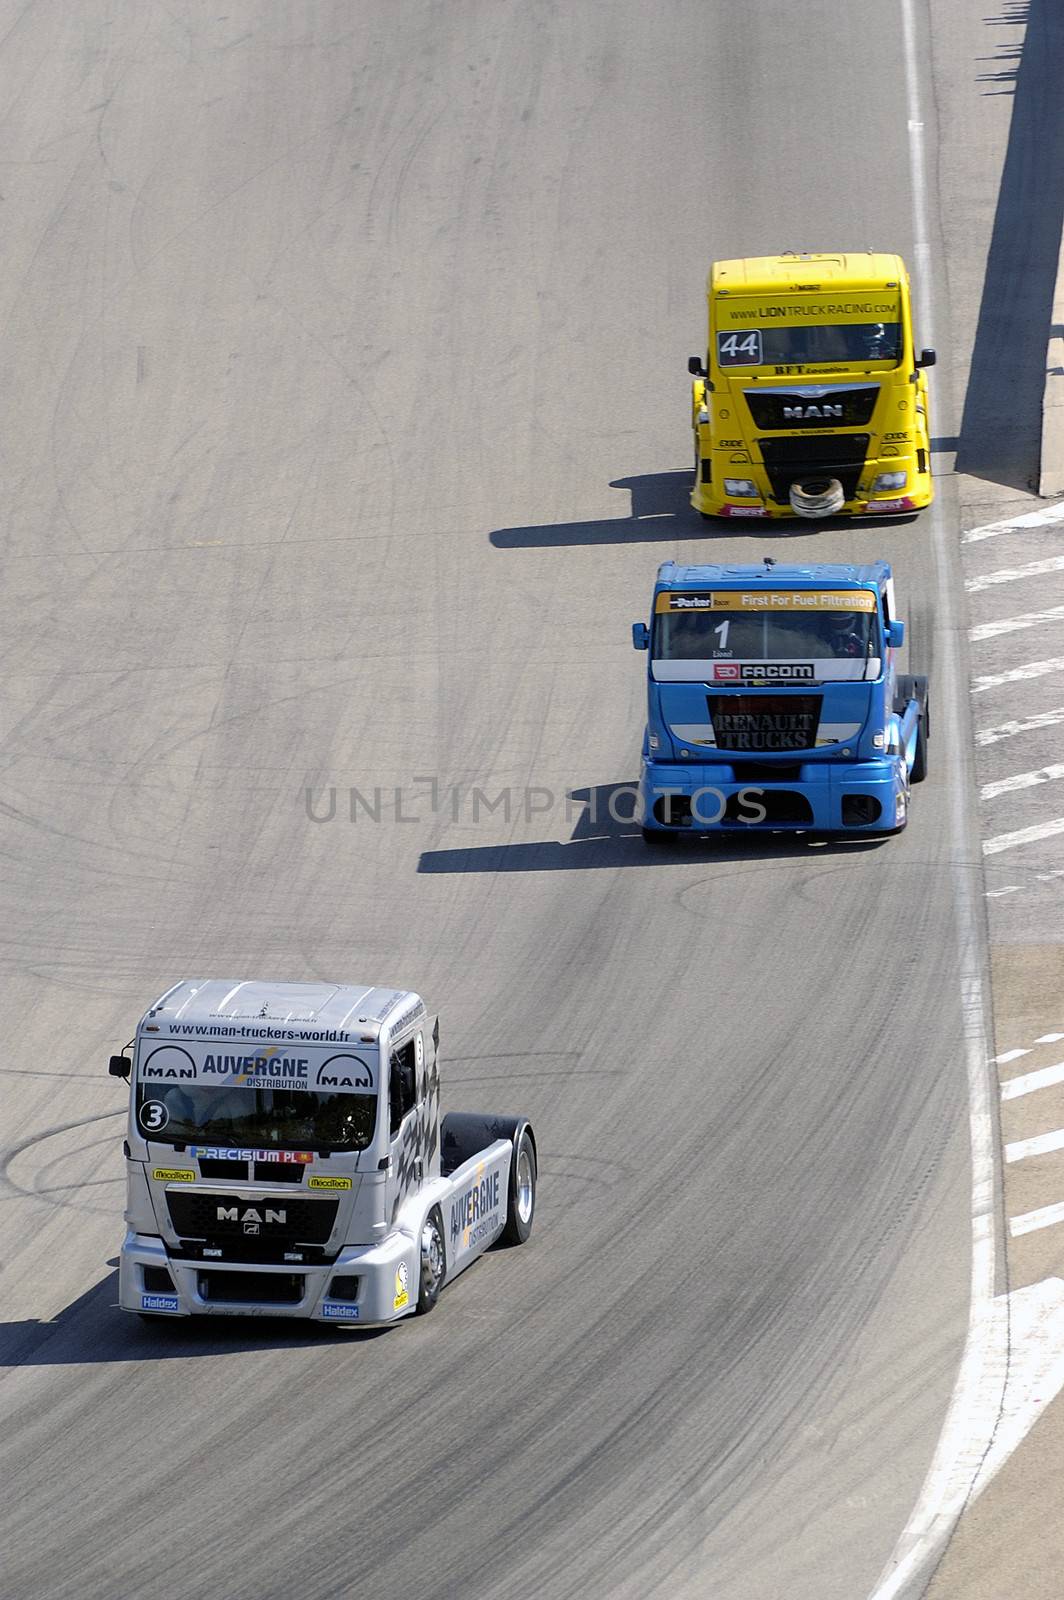 Ales - France - Grand Prix of France trucks May 25th and 26th, 2013 on the circuit of the Cevennes.